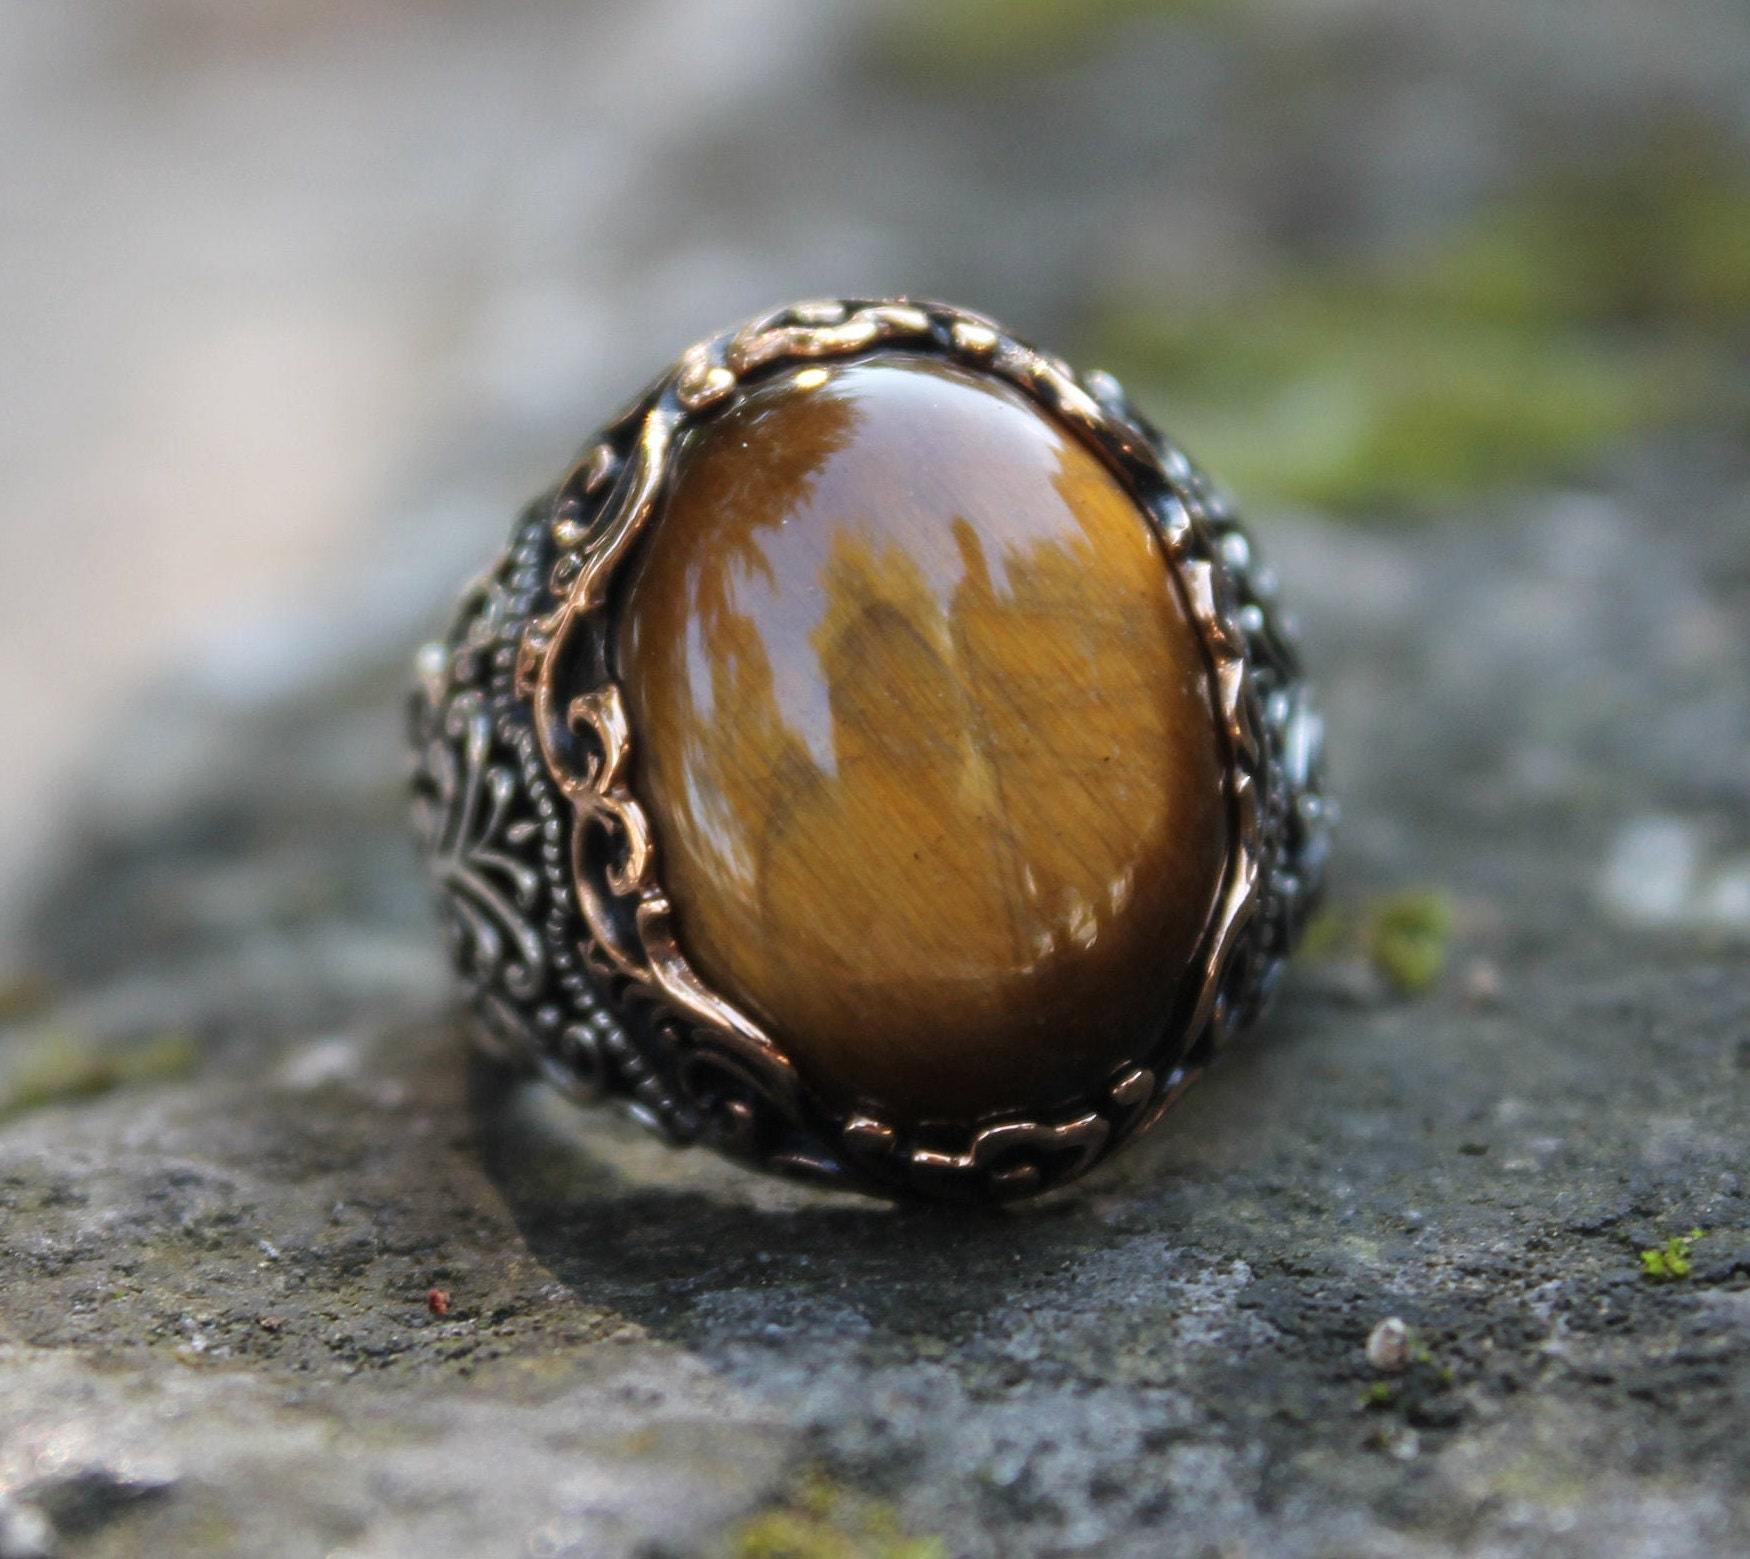 Vintage Silver Men Ring, Tiger Eye Gemstone Ring, Engraved Sterling Silver Man Ring, Handmade Oval Ring, Valentine's Day Gift for Him - OXO SILVER